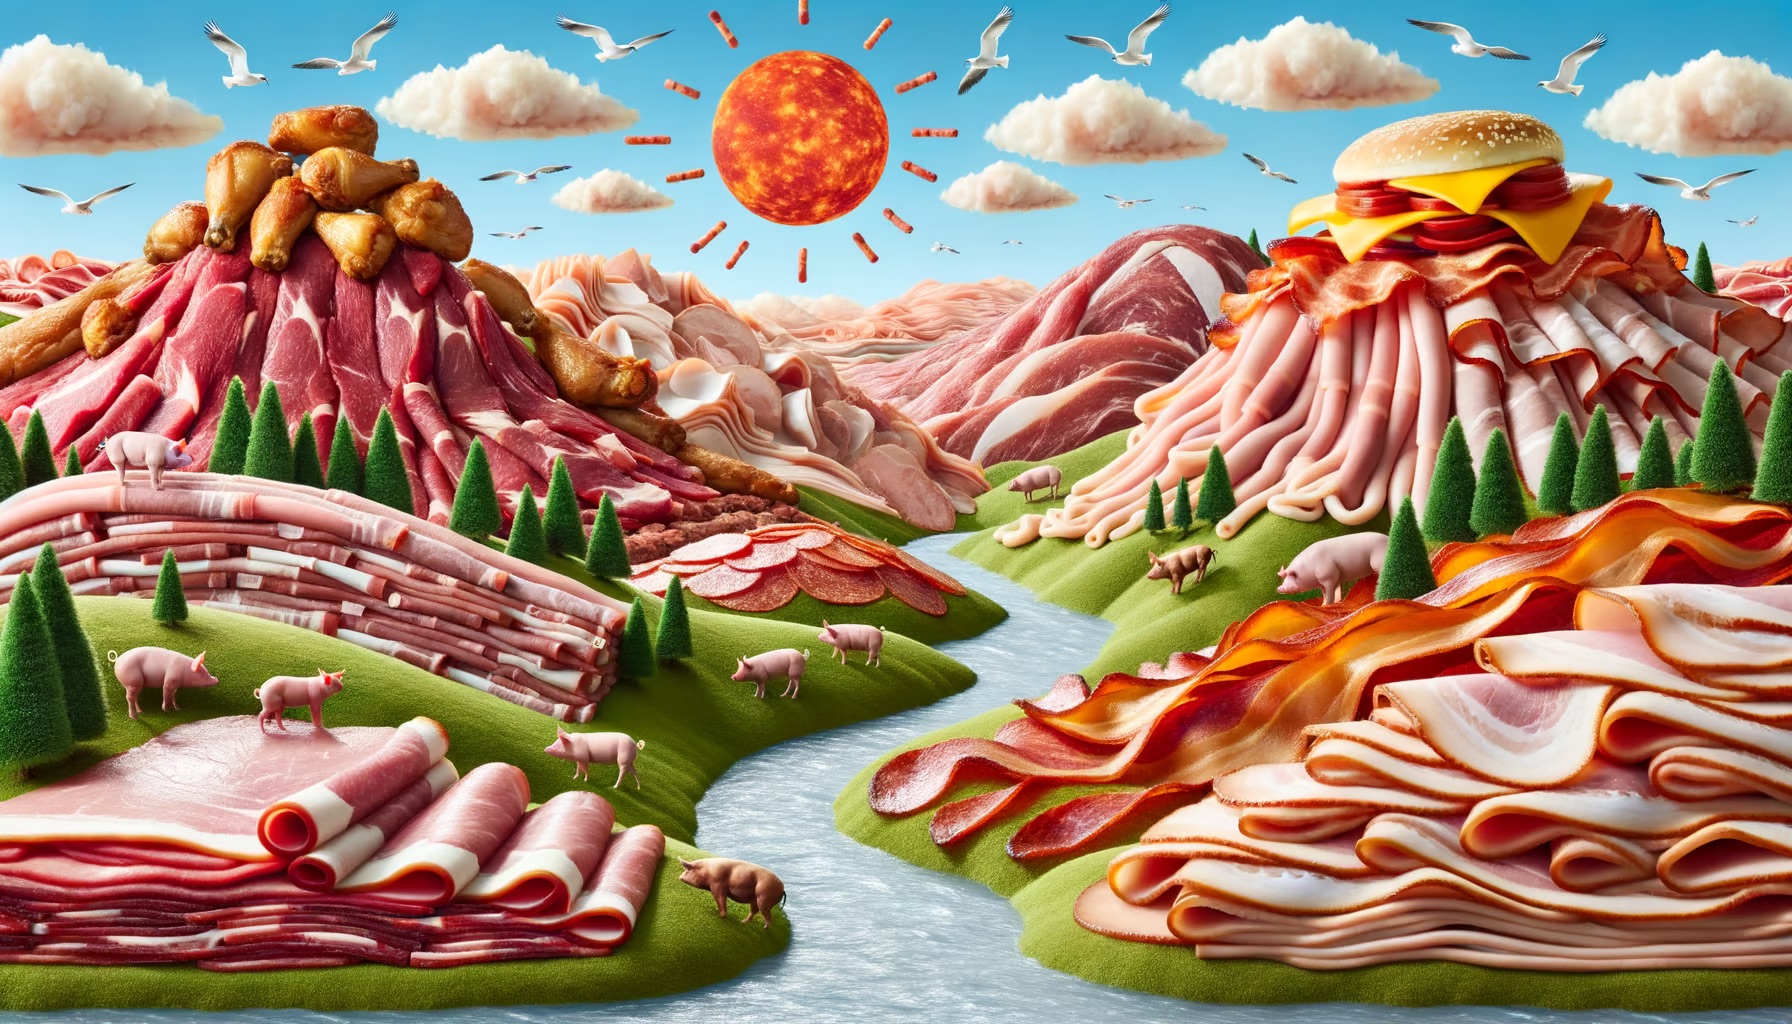 Dall-e 3: A vast landscape made entirely of various meats spreads out before the viewer.Tender, succulent hills of roast beef, chicken drumstick trees, bacon rivers, and ham boulders create a surreal, yet appetizing scene. the sky is adorned with pepperoni sun and salami clouds.